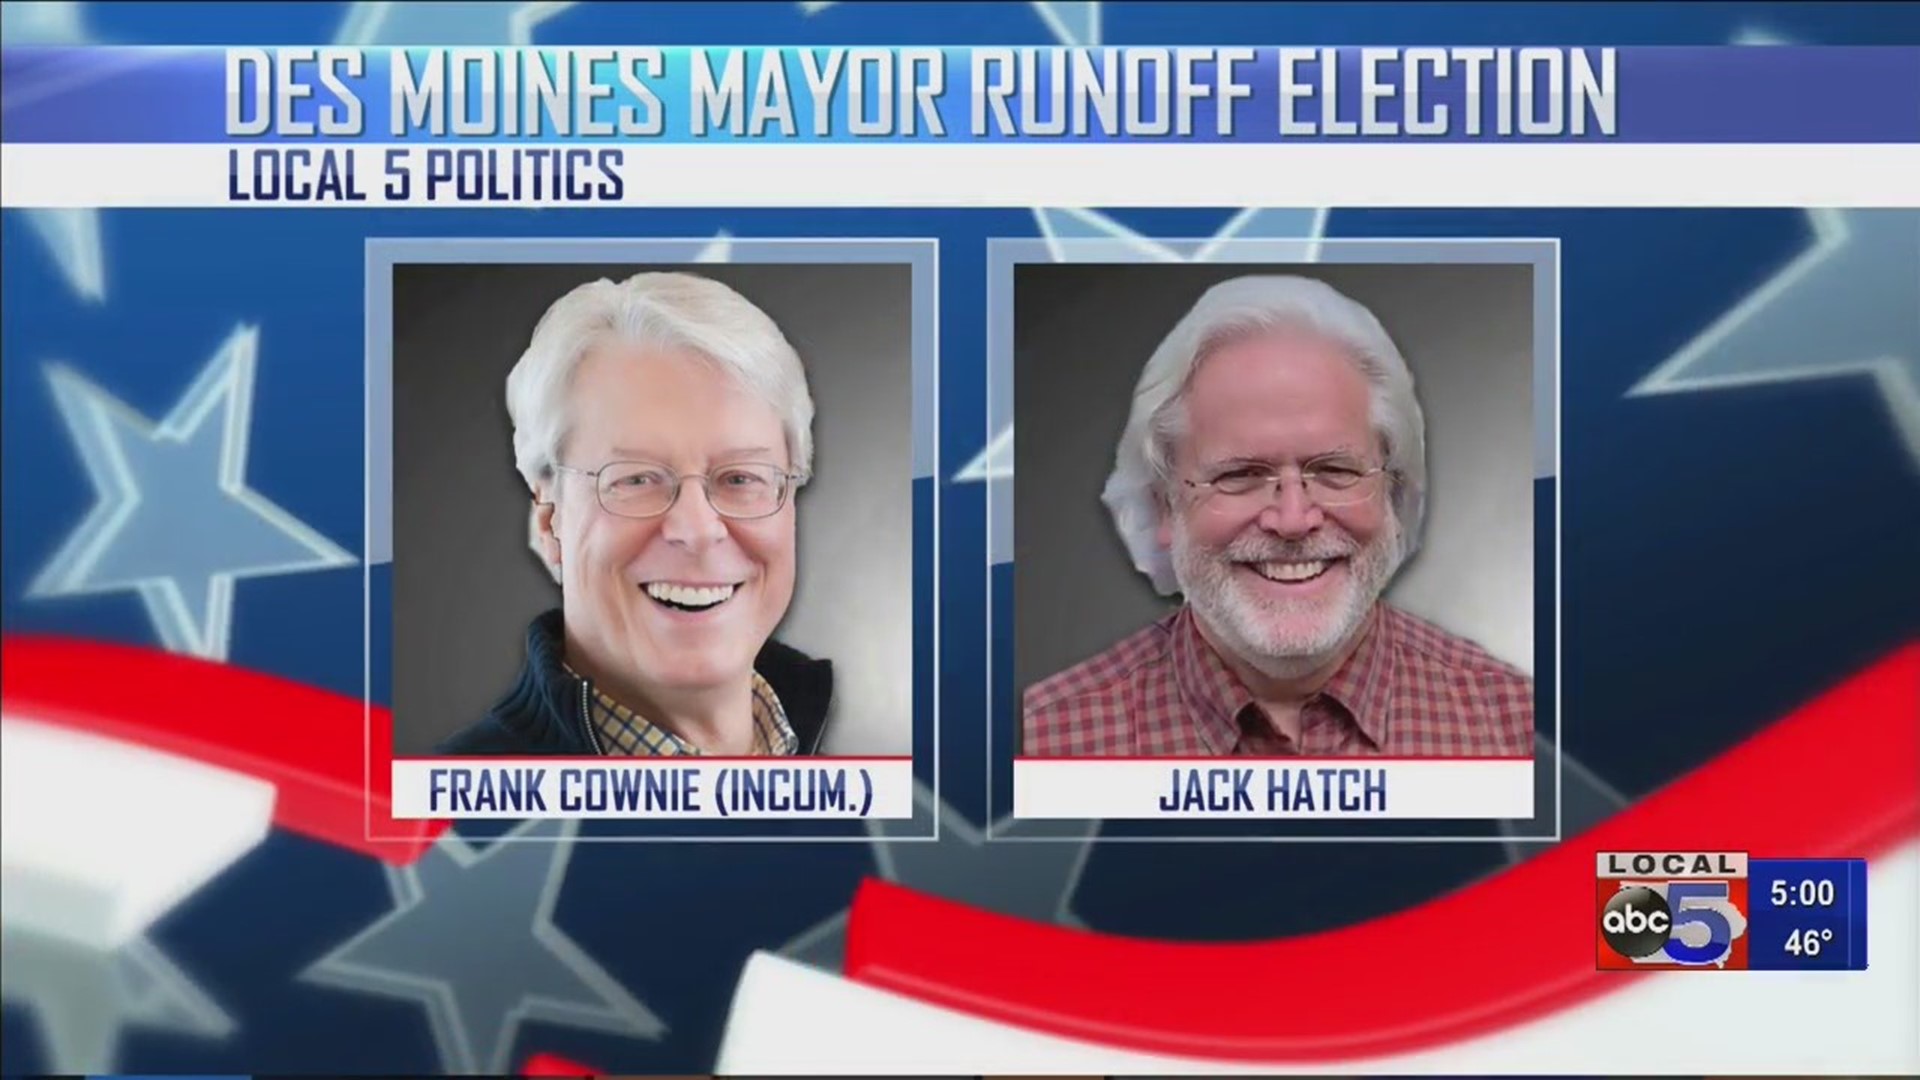 City runoff elections in Des Moines, Ames